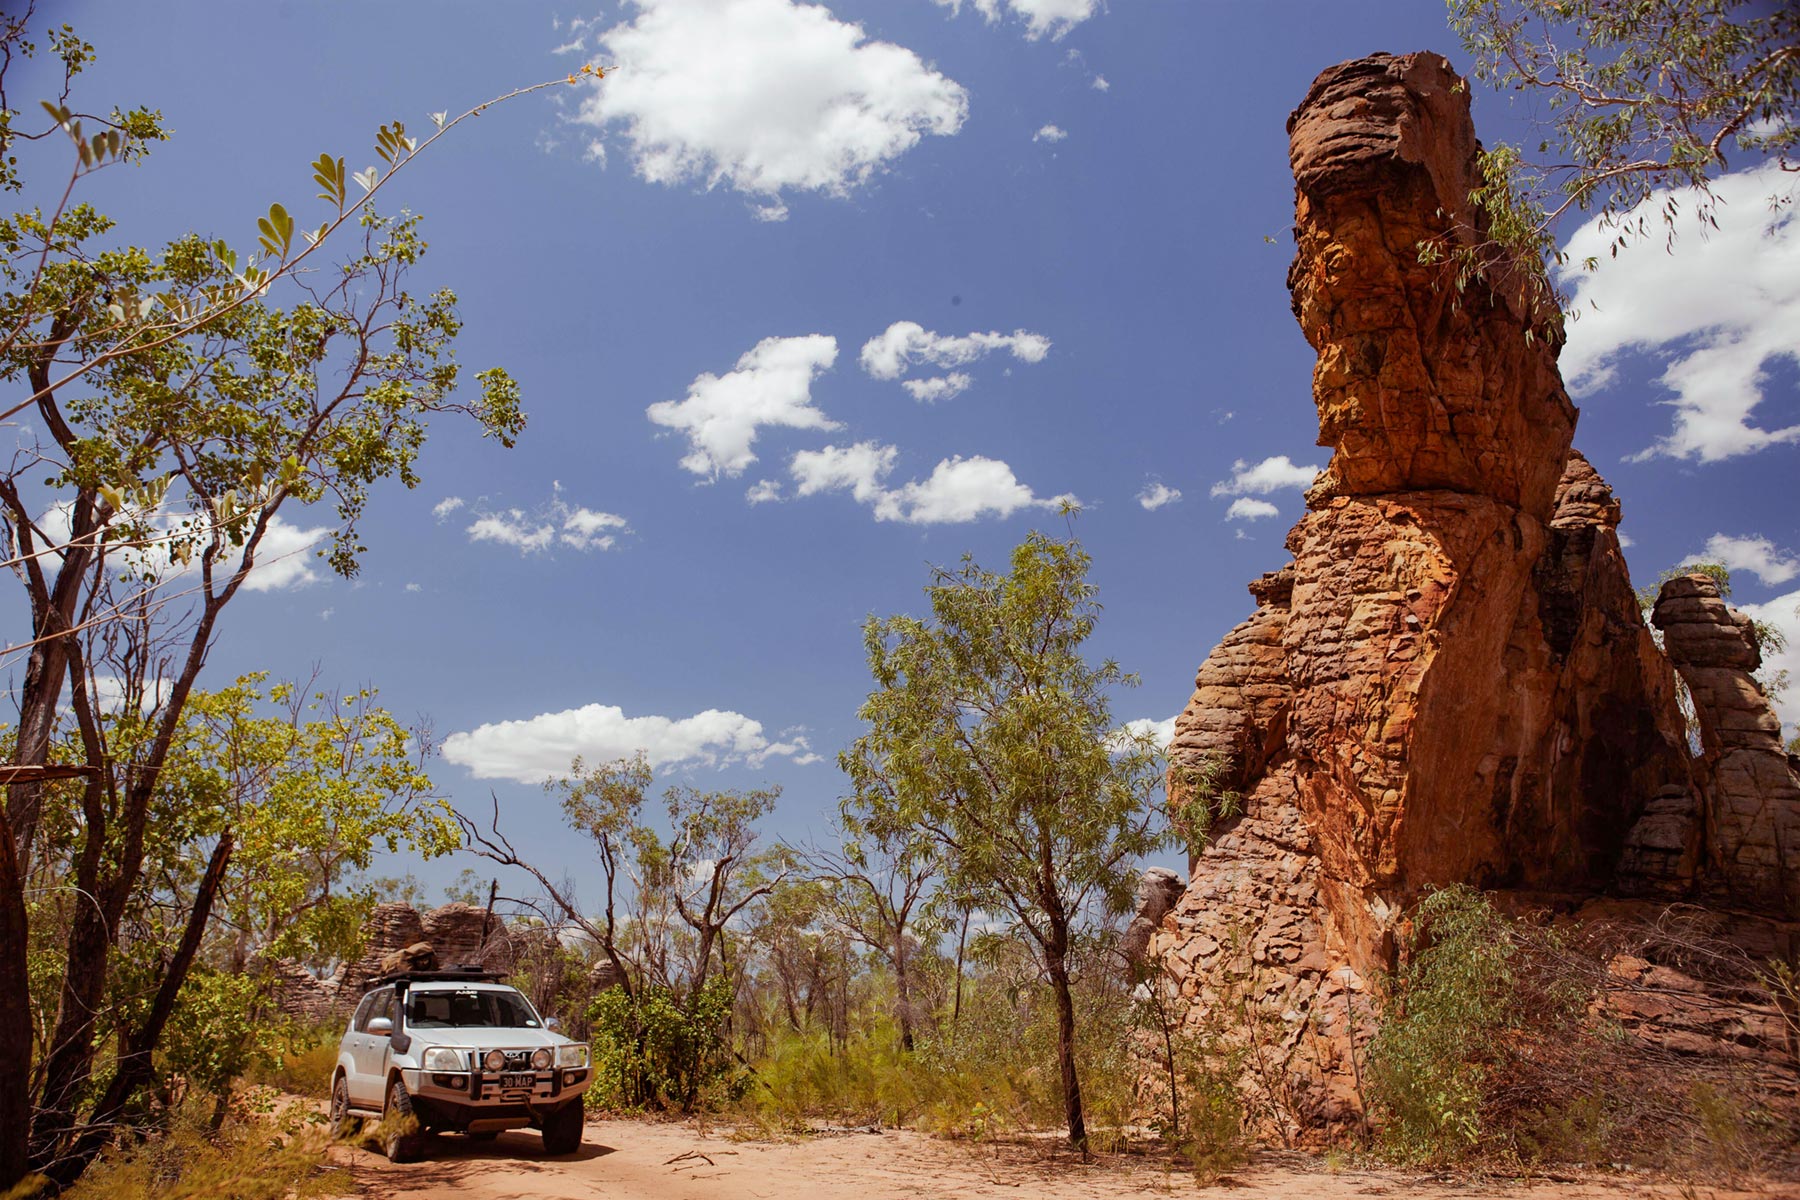 This towering rock guards the entrance to Western Lost City